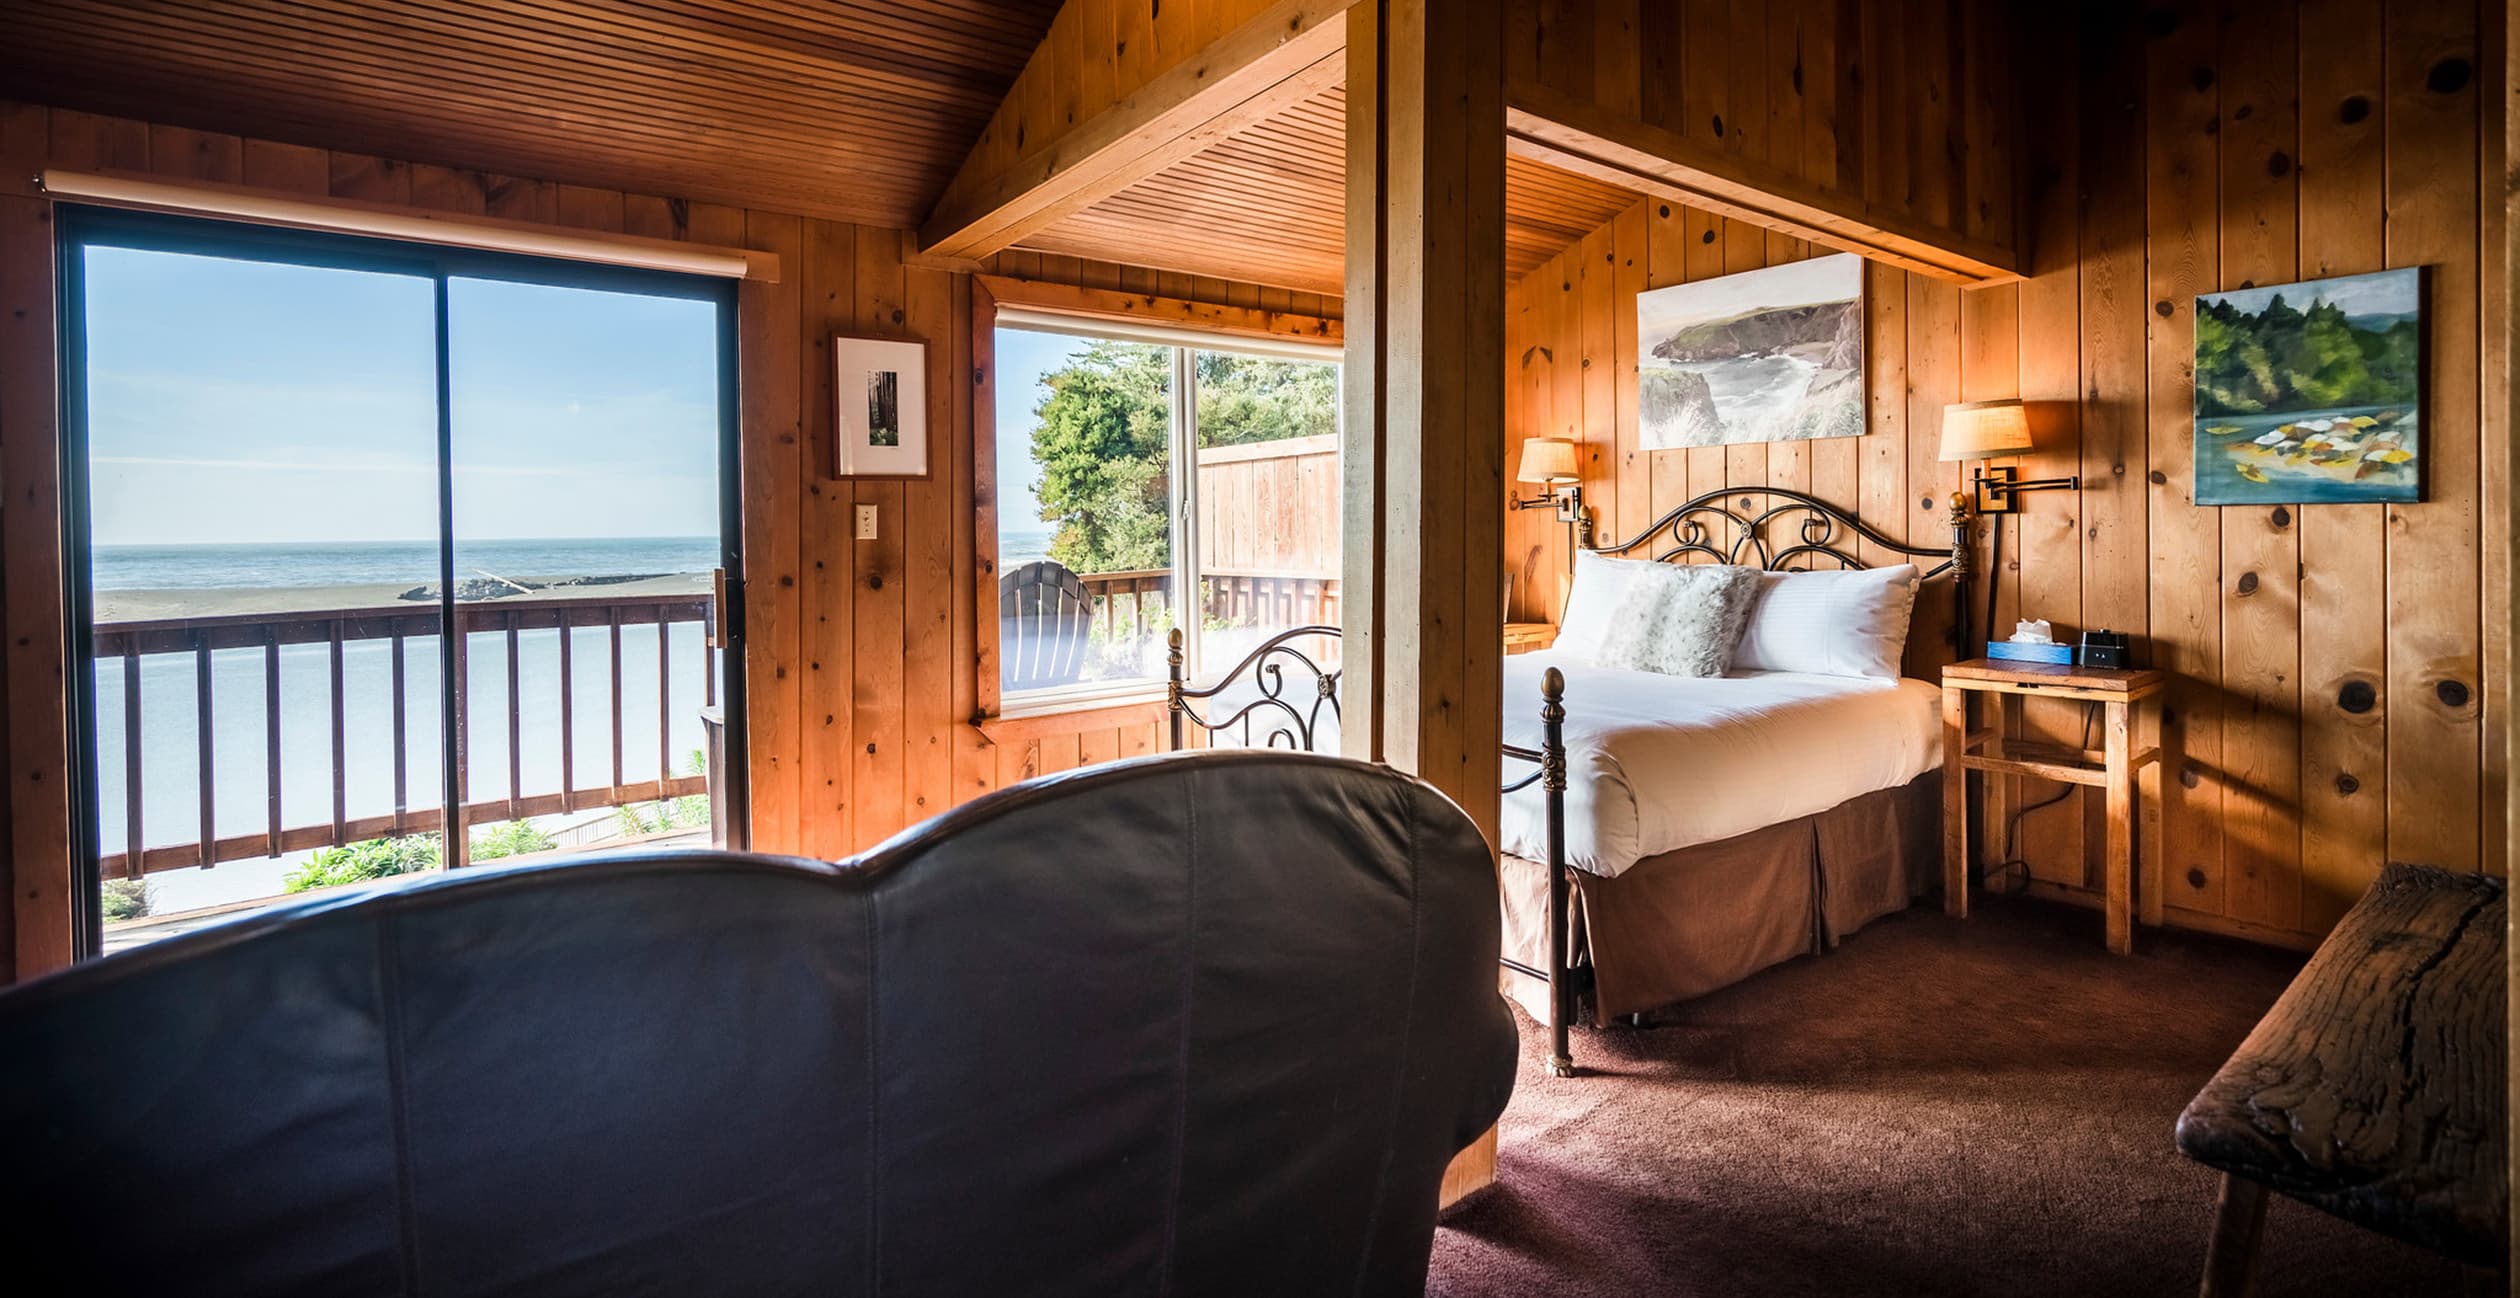 Cabin 4 bed and ocean view